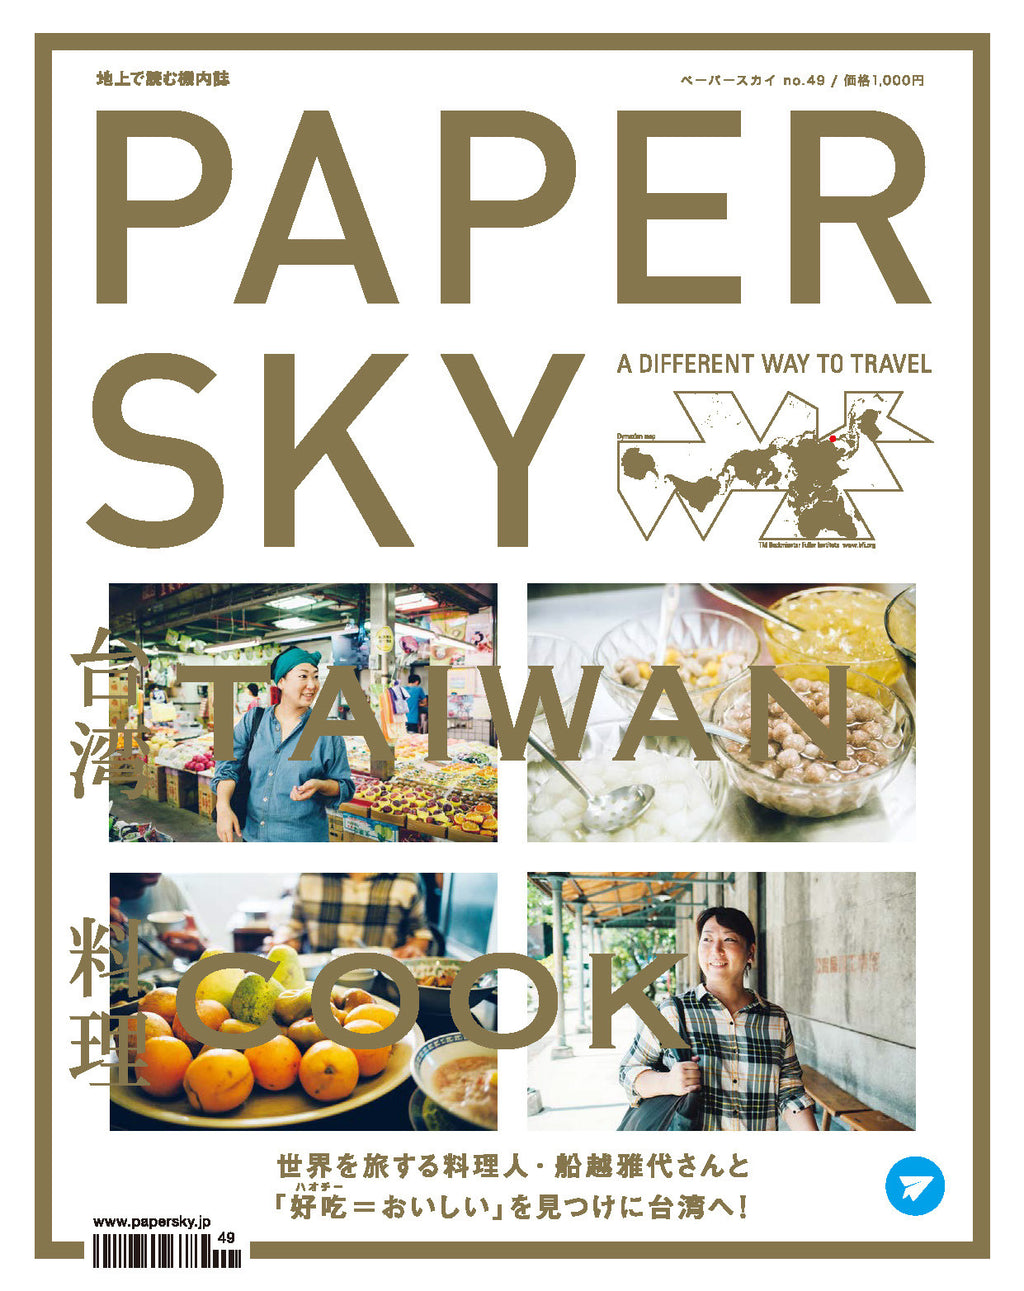 TAIWAN, papersky magaze, i世界を旅する料理人, 船越雅代さん